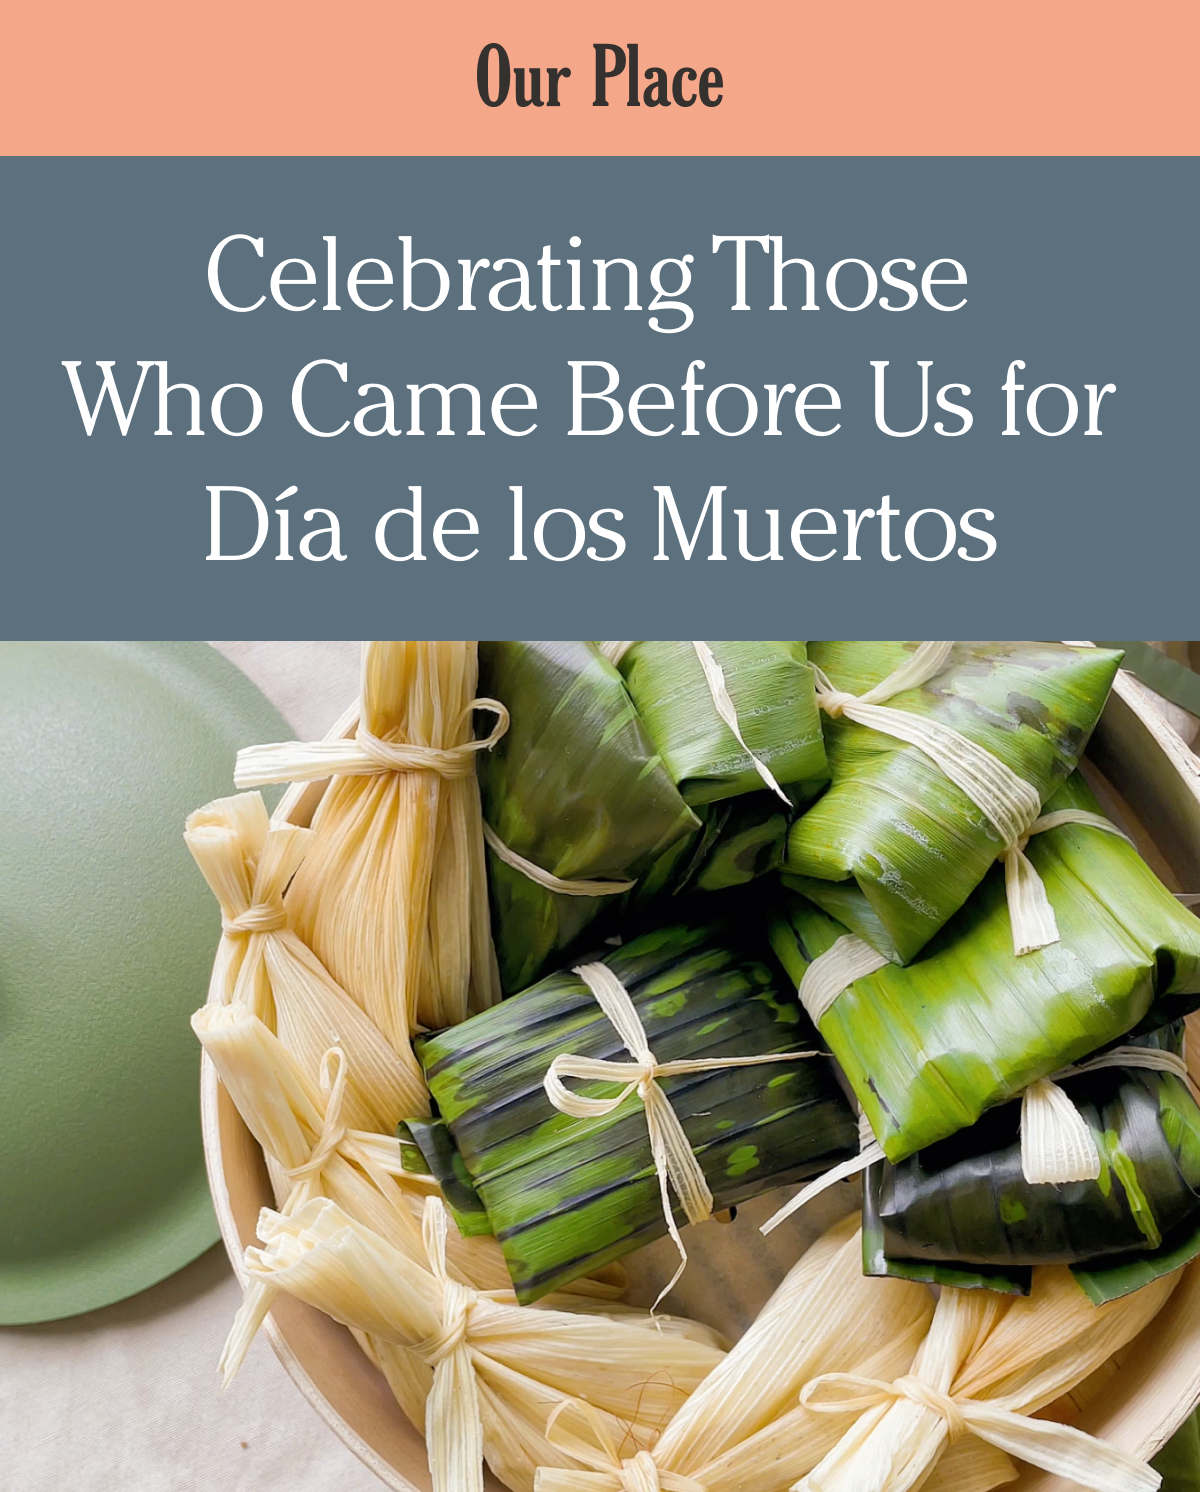 Our Place - Celebrating Those Who Came Before Us for Día de los Muertos